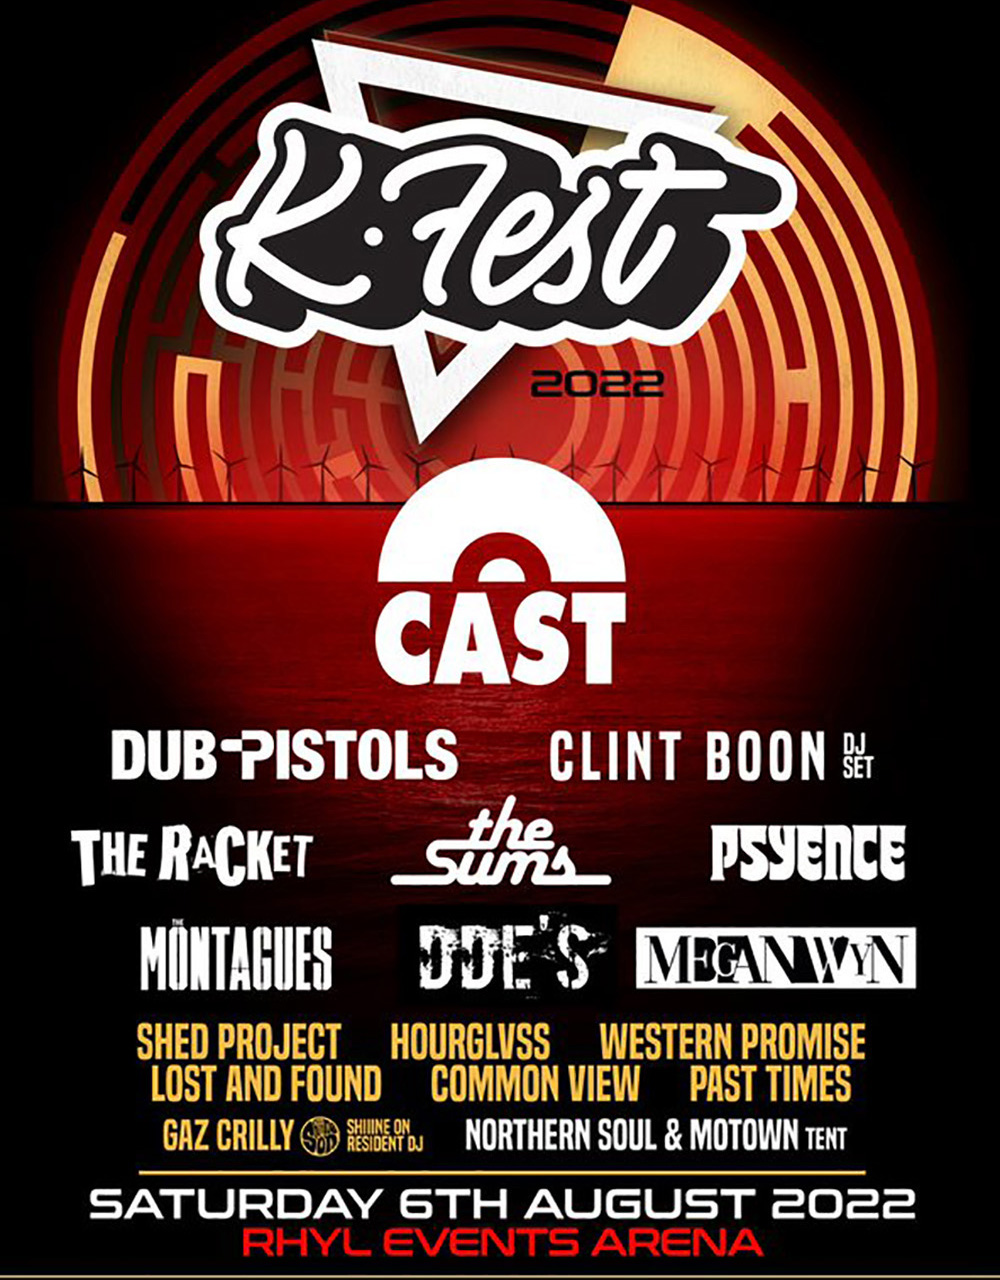 KFest comes to Rhyl with three day lineup announced